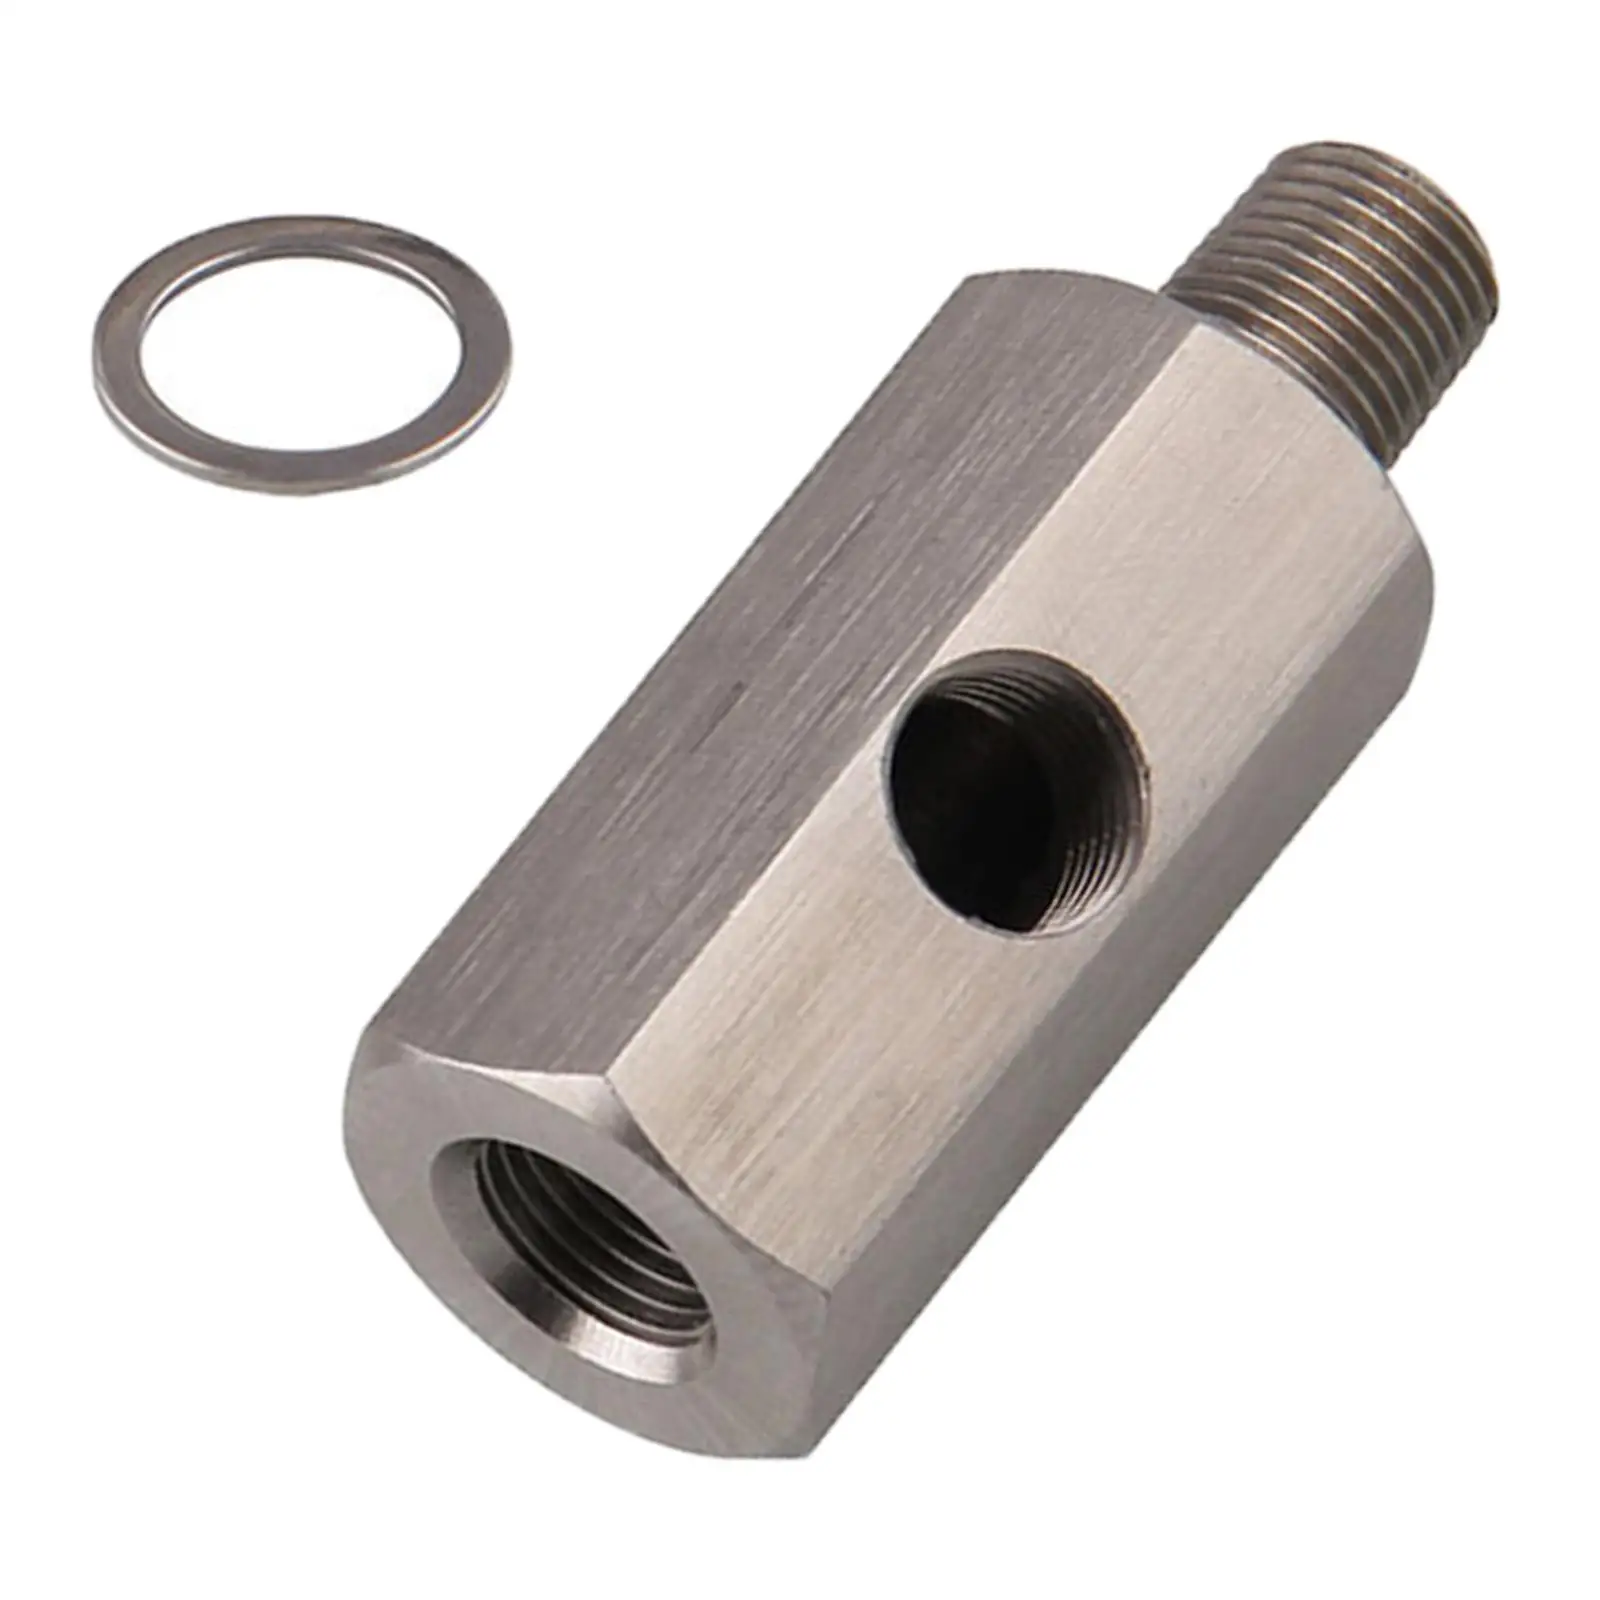 Oil Pressure Sensor  Adapter Fitting 1/8 inch NPT   feed Line  Direct Replaces Easy to Install